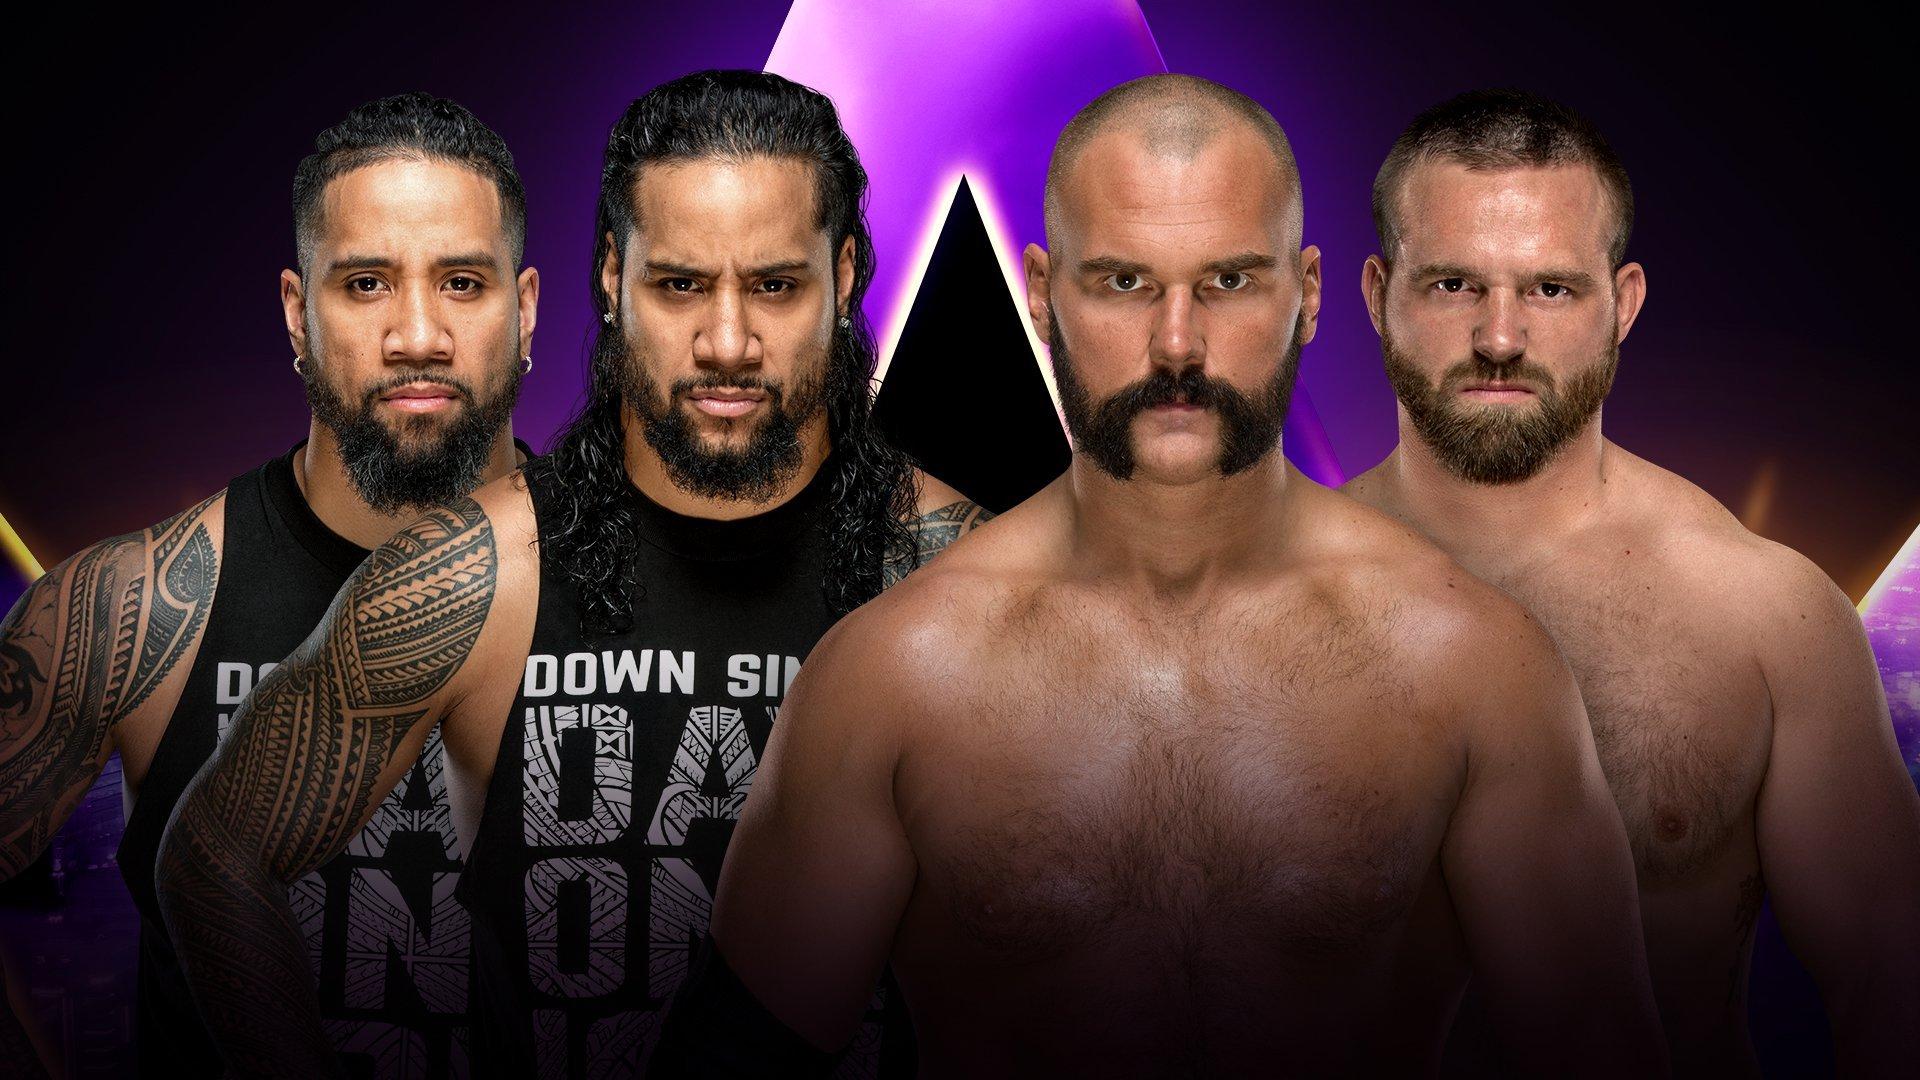 WWE Super ShowDown 2019: Picks for Every Match and Bold Predictions